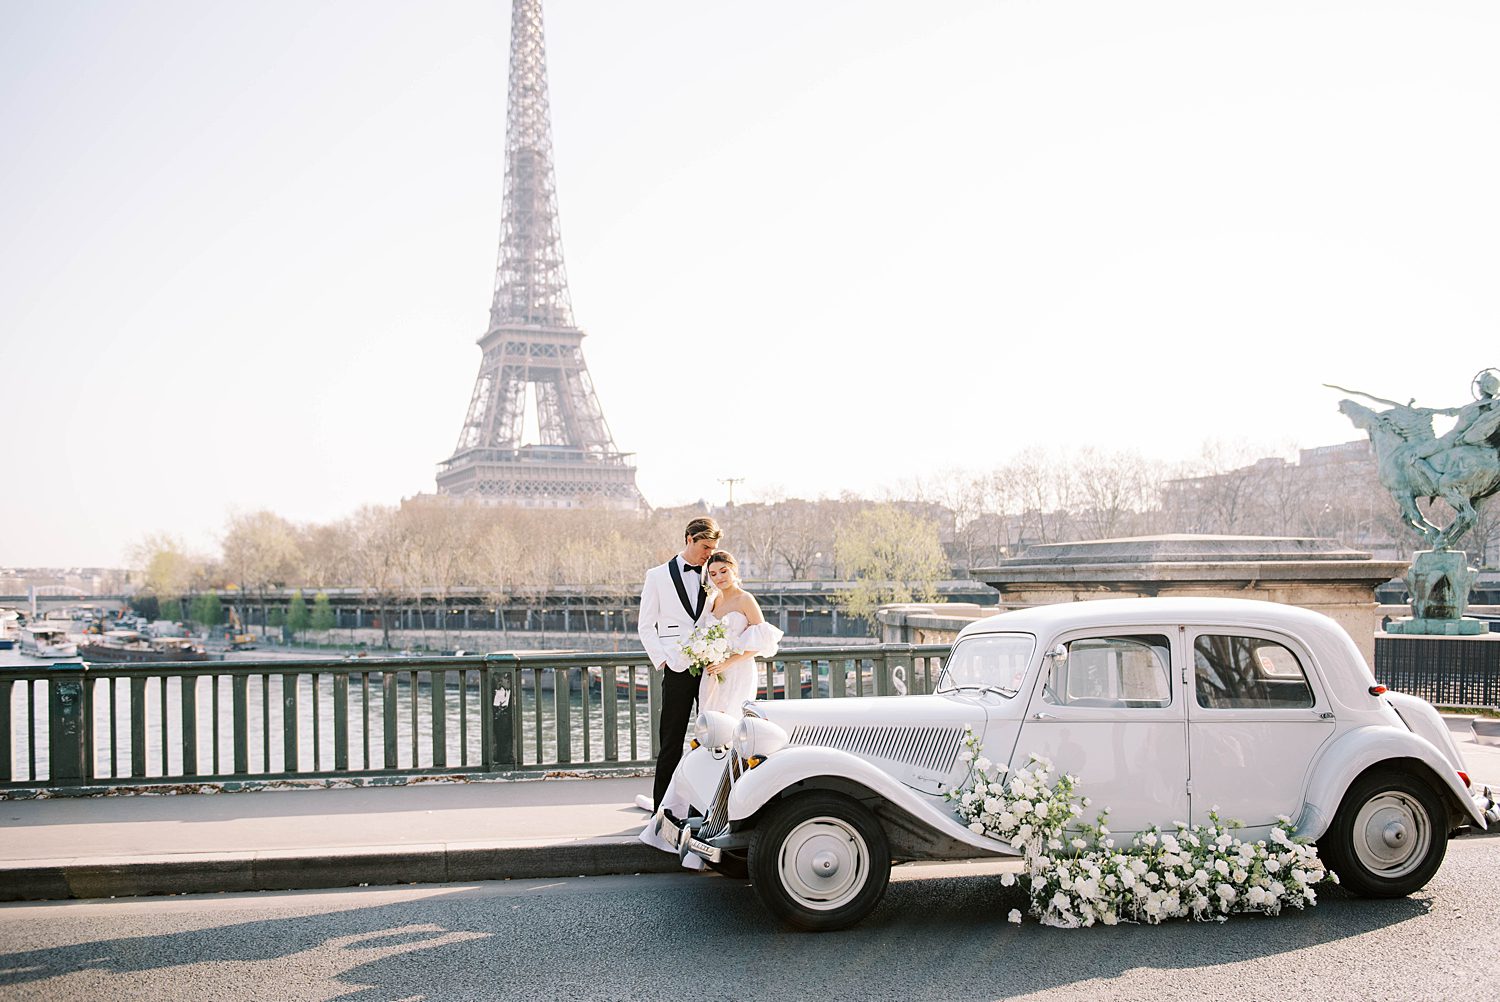 bride and groom kiss by Eiffel Tower in Paris